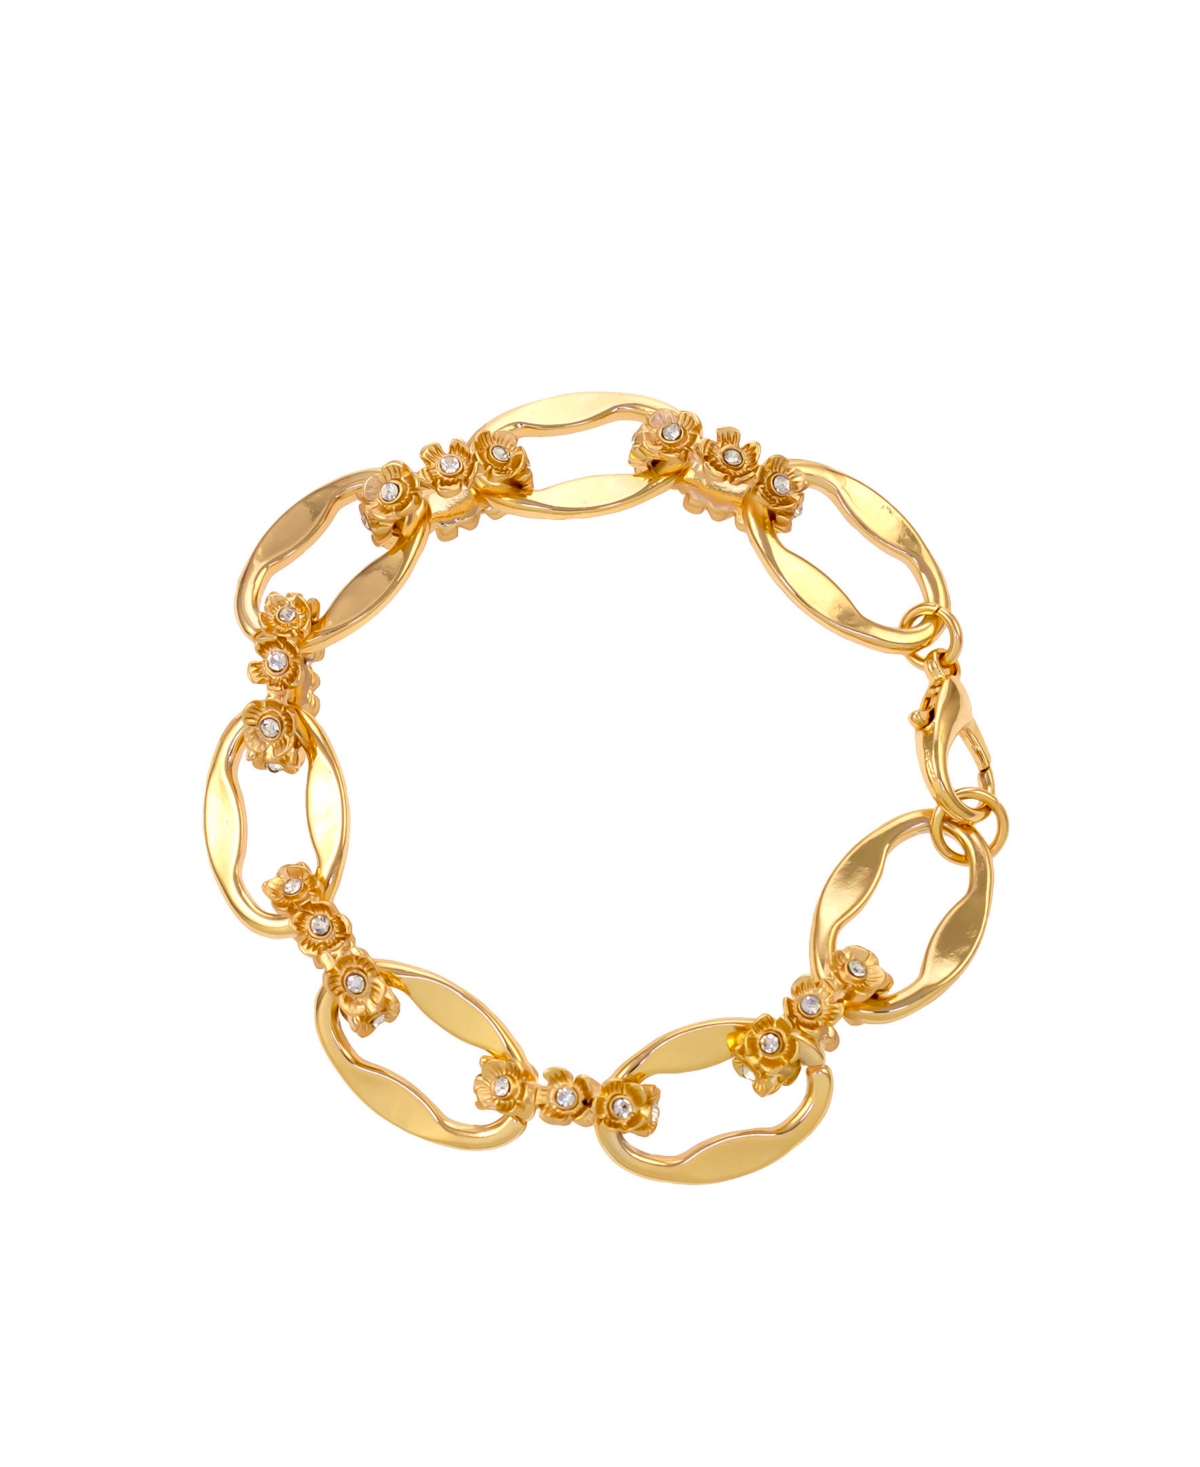 Laura Ashley Linked With Crystal Accent Bracelet